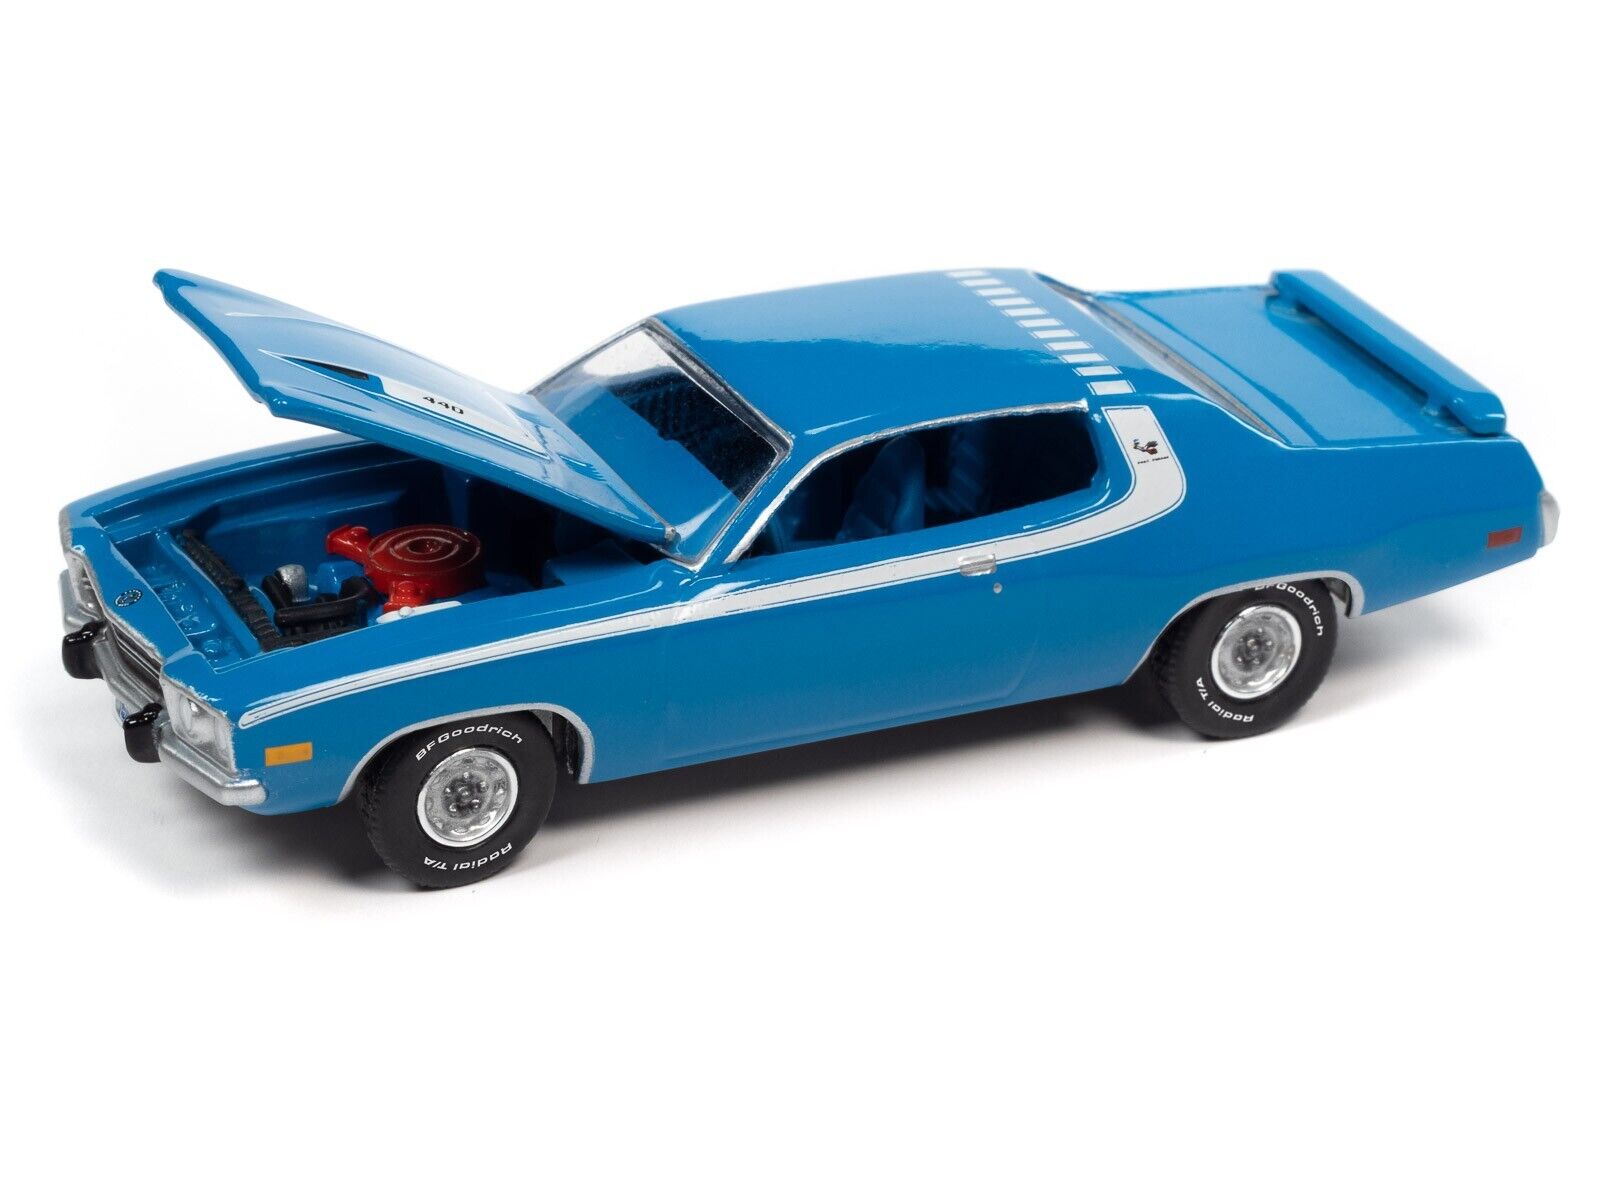 1/64 1973 PLYMOUTH ROAD RUNNER 440 BASIN STREET BLUE - VINTAGE MUSCLE